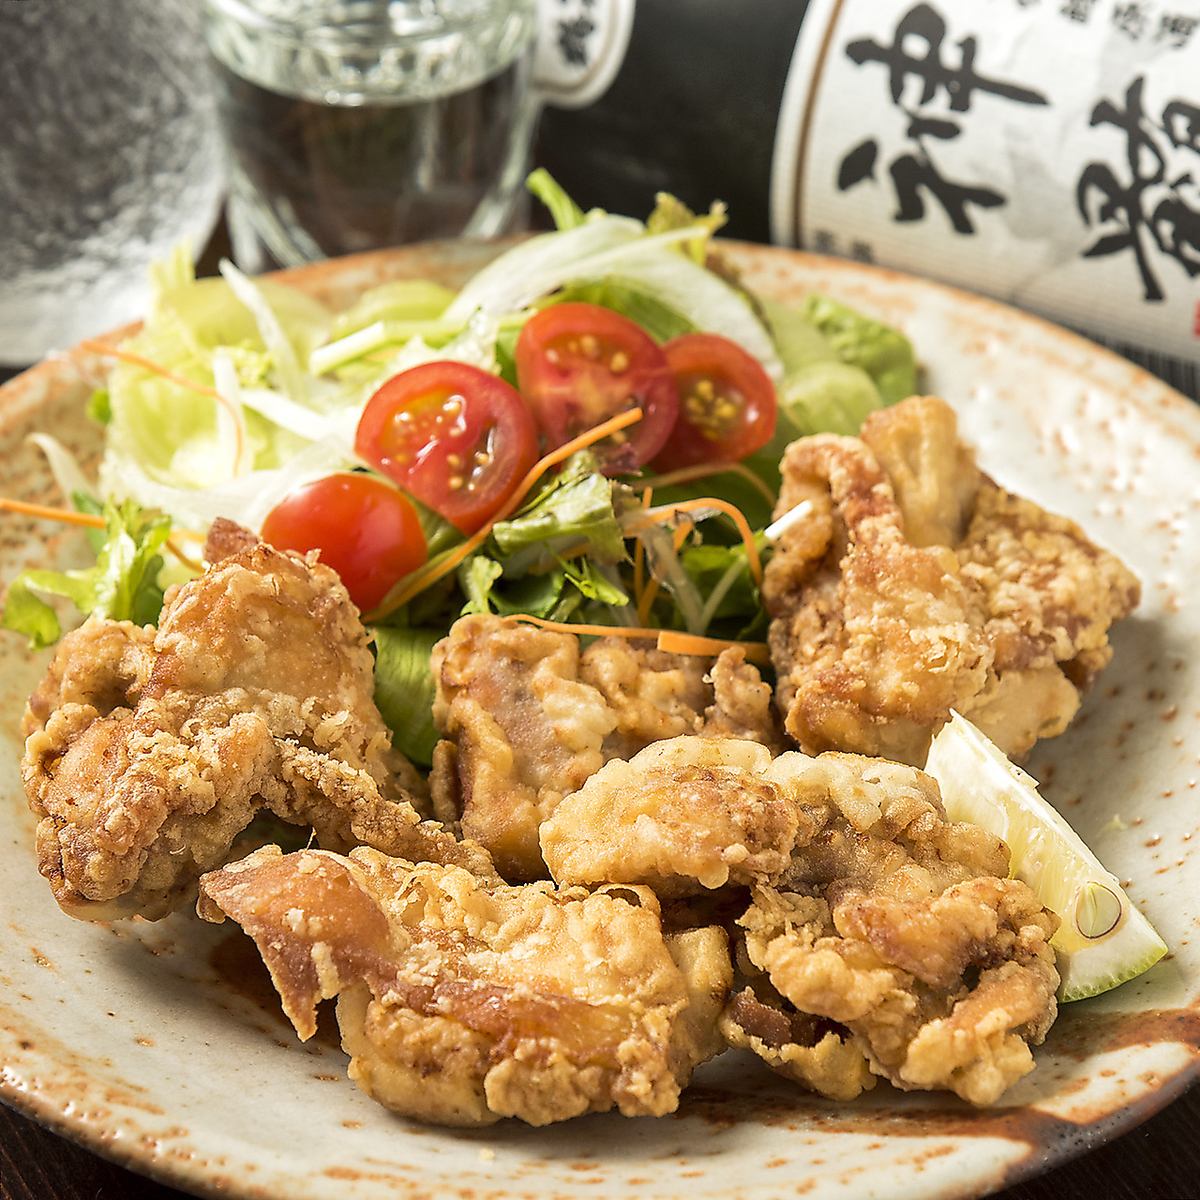 Reasonable lunch is available from 620 yen for a set meal ♪ Takeout is also OK!